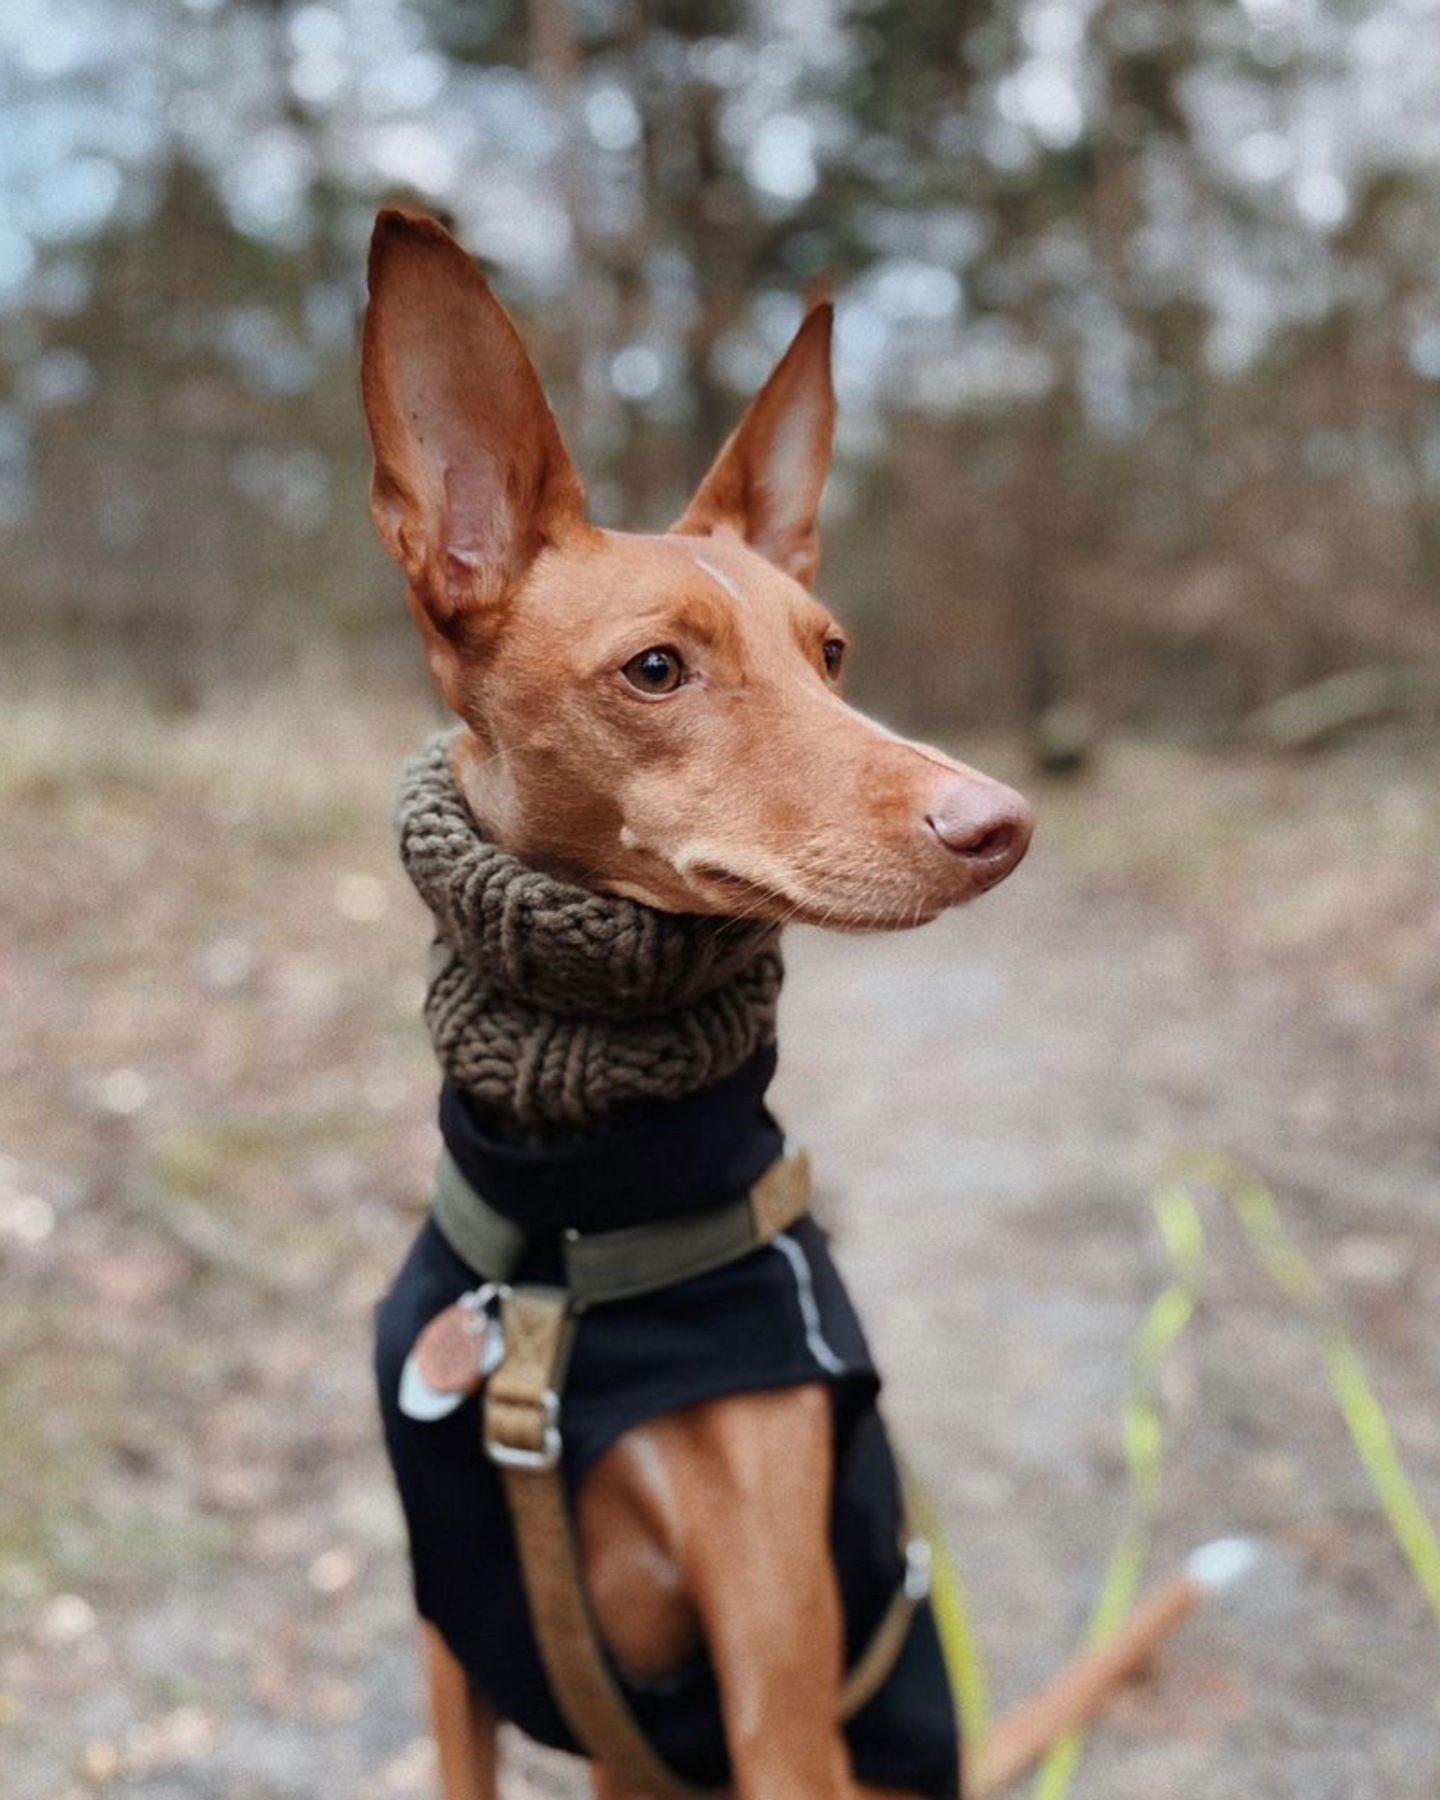 An adorable dog on a walk wearing a sweater 